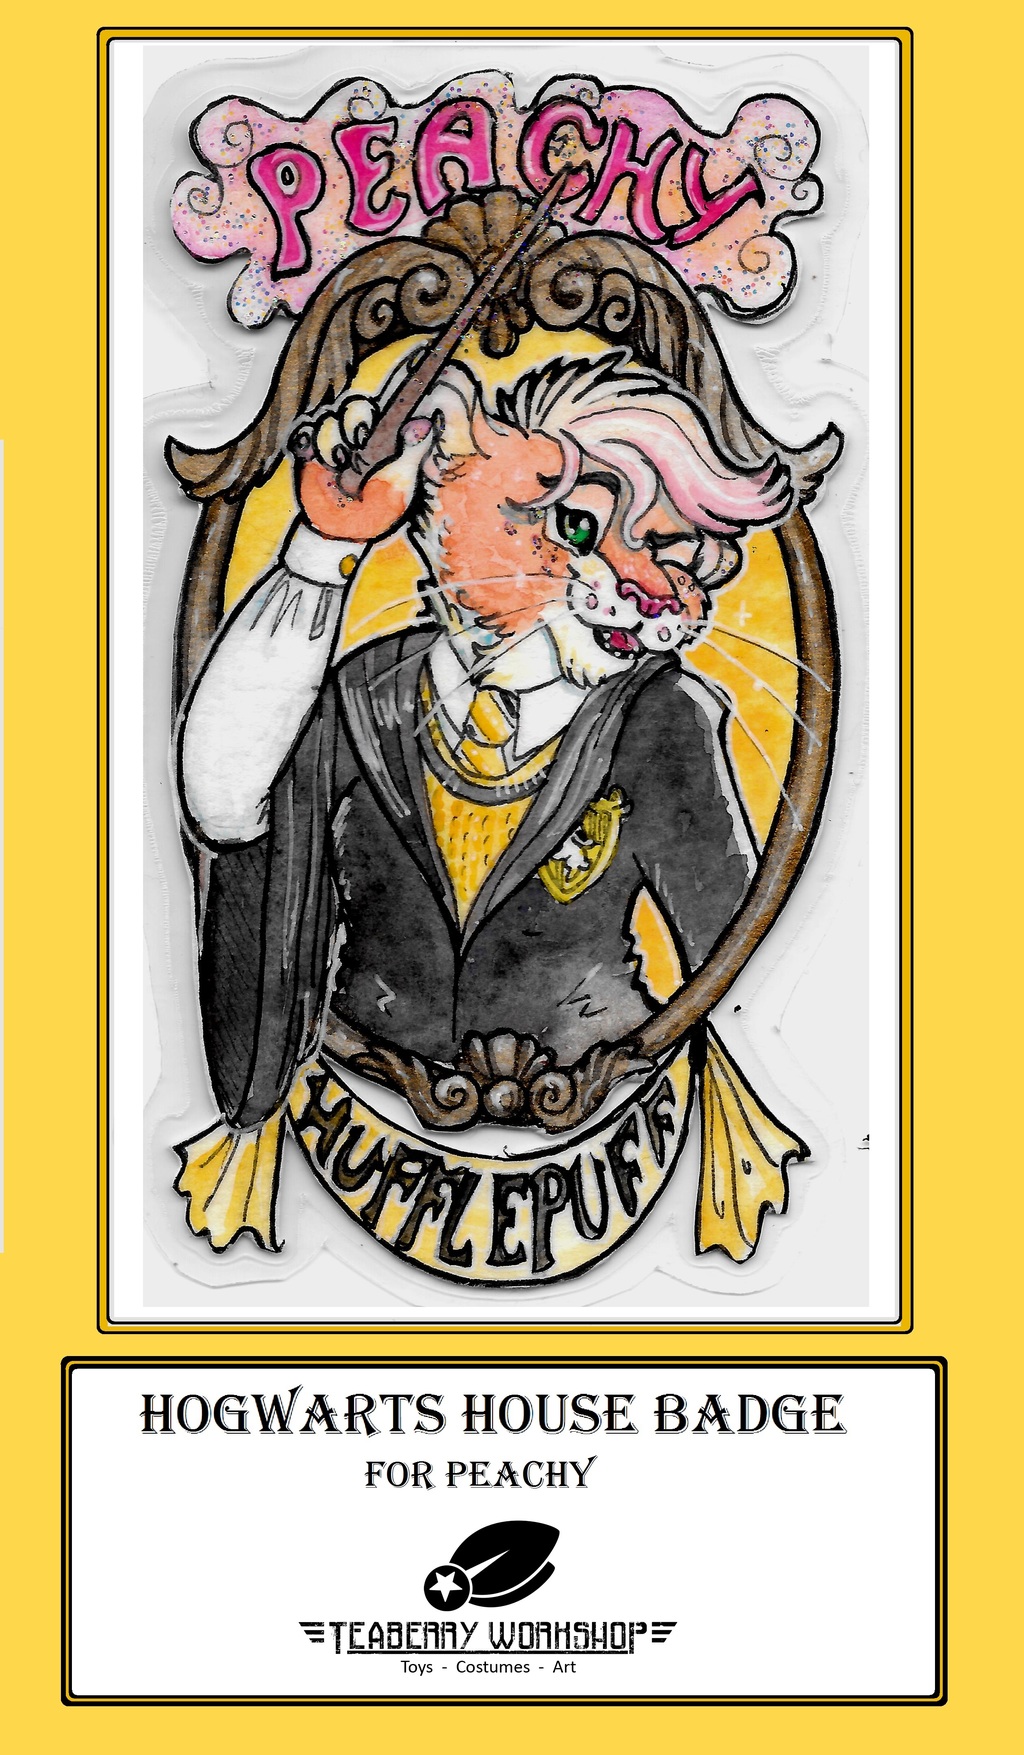 Most recent image: Hogwarts House Badge: Peachy